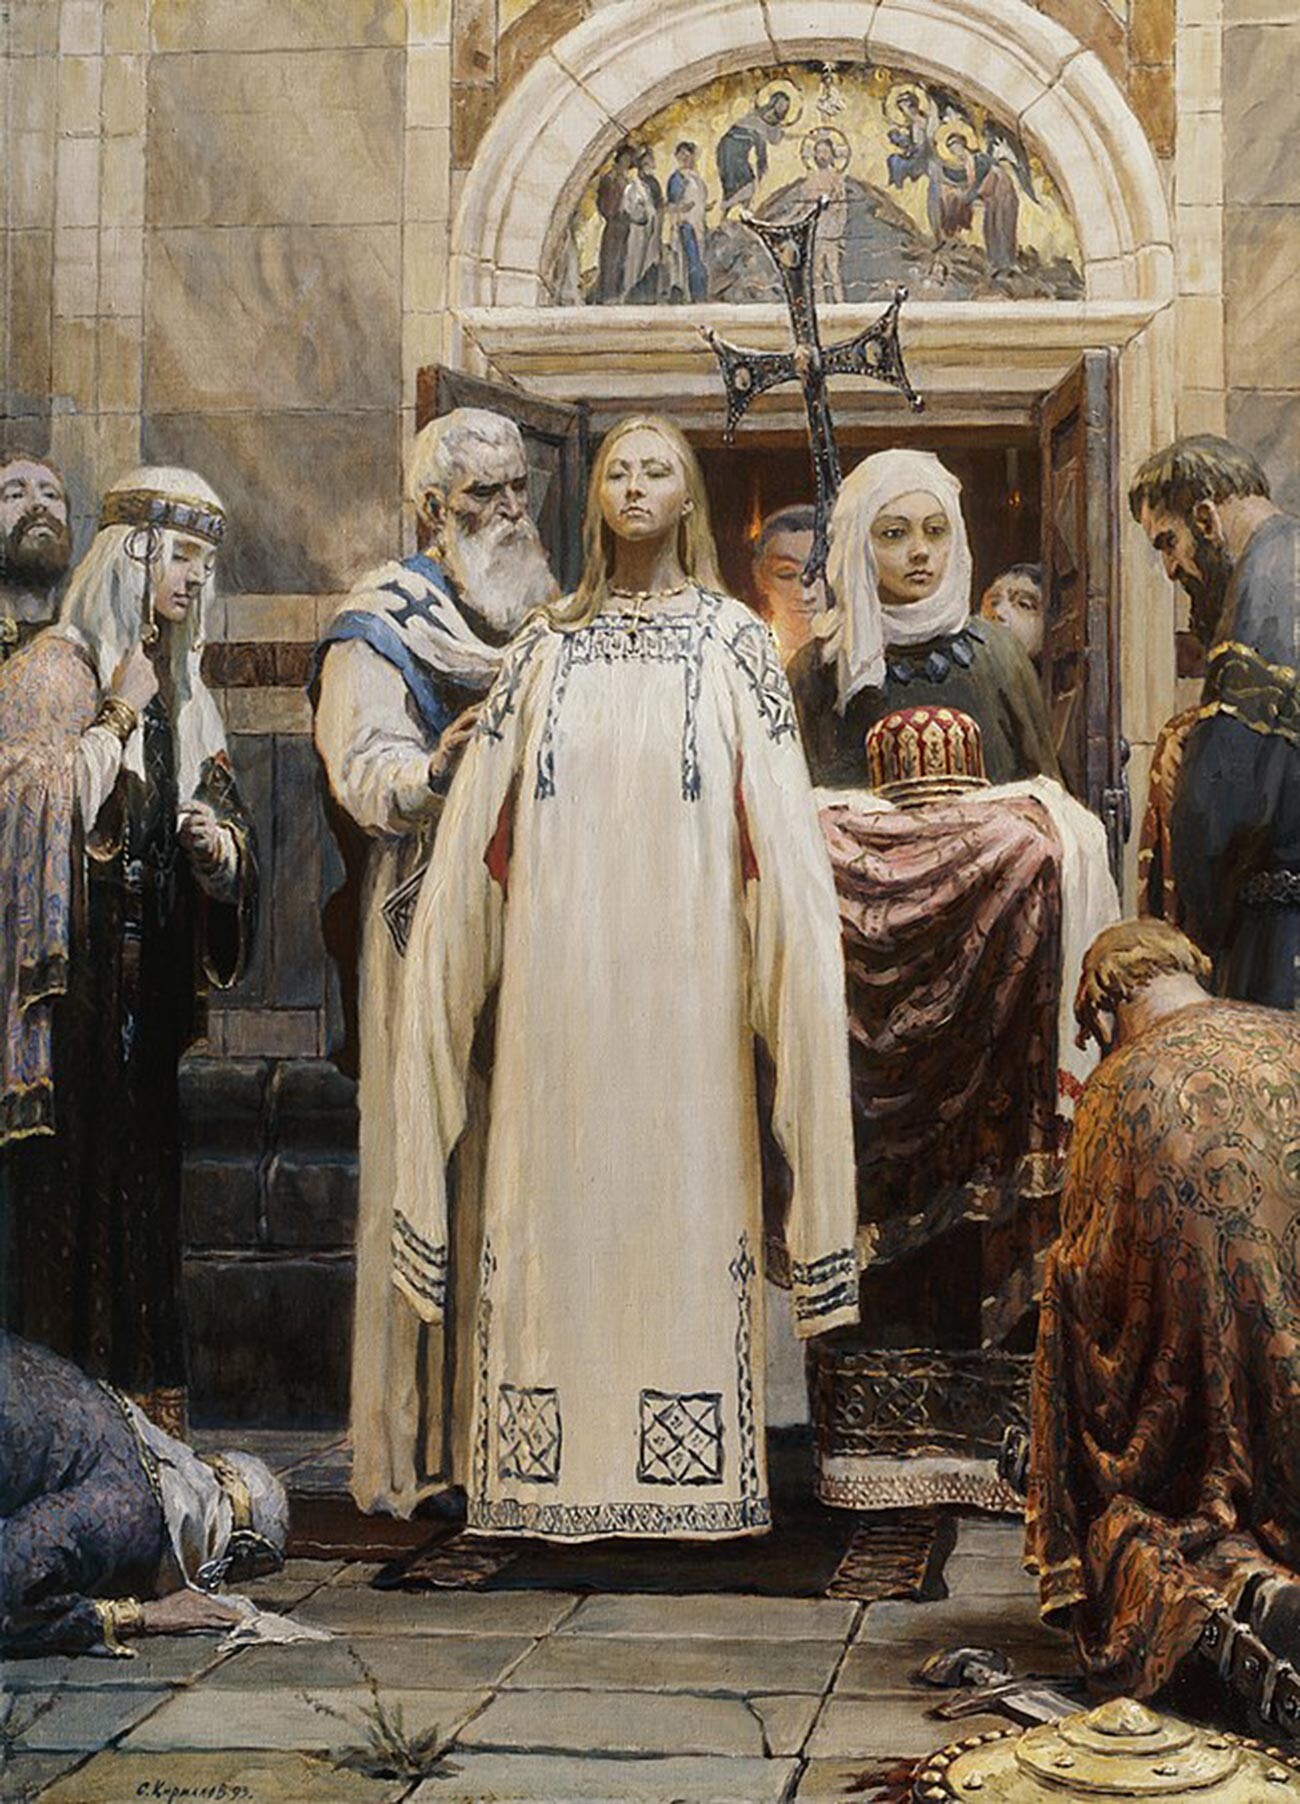 Princess Olga (Baptism). The first part of the ‘Holy Russia’ trilogy. Avenged by Drevlyans for the death of her husband Prince Igor Princess Olga was the first ruler of Russia, which adopted Christianity (but only for herself).